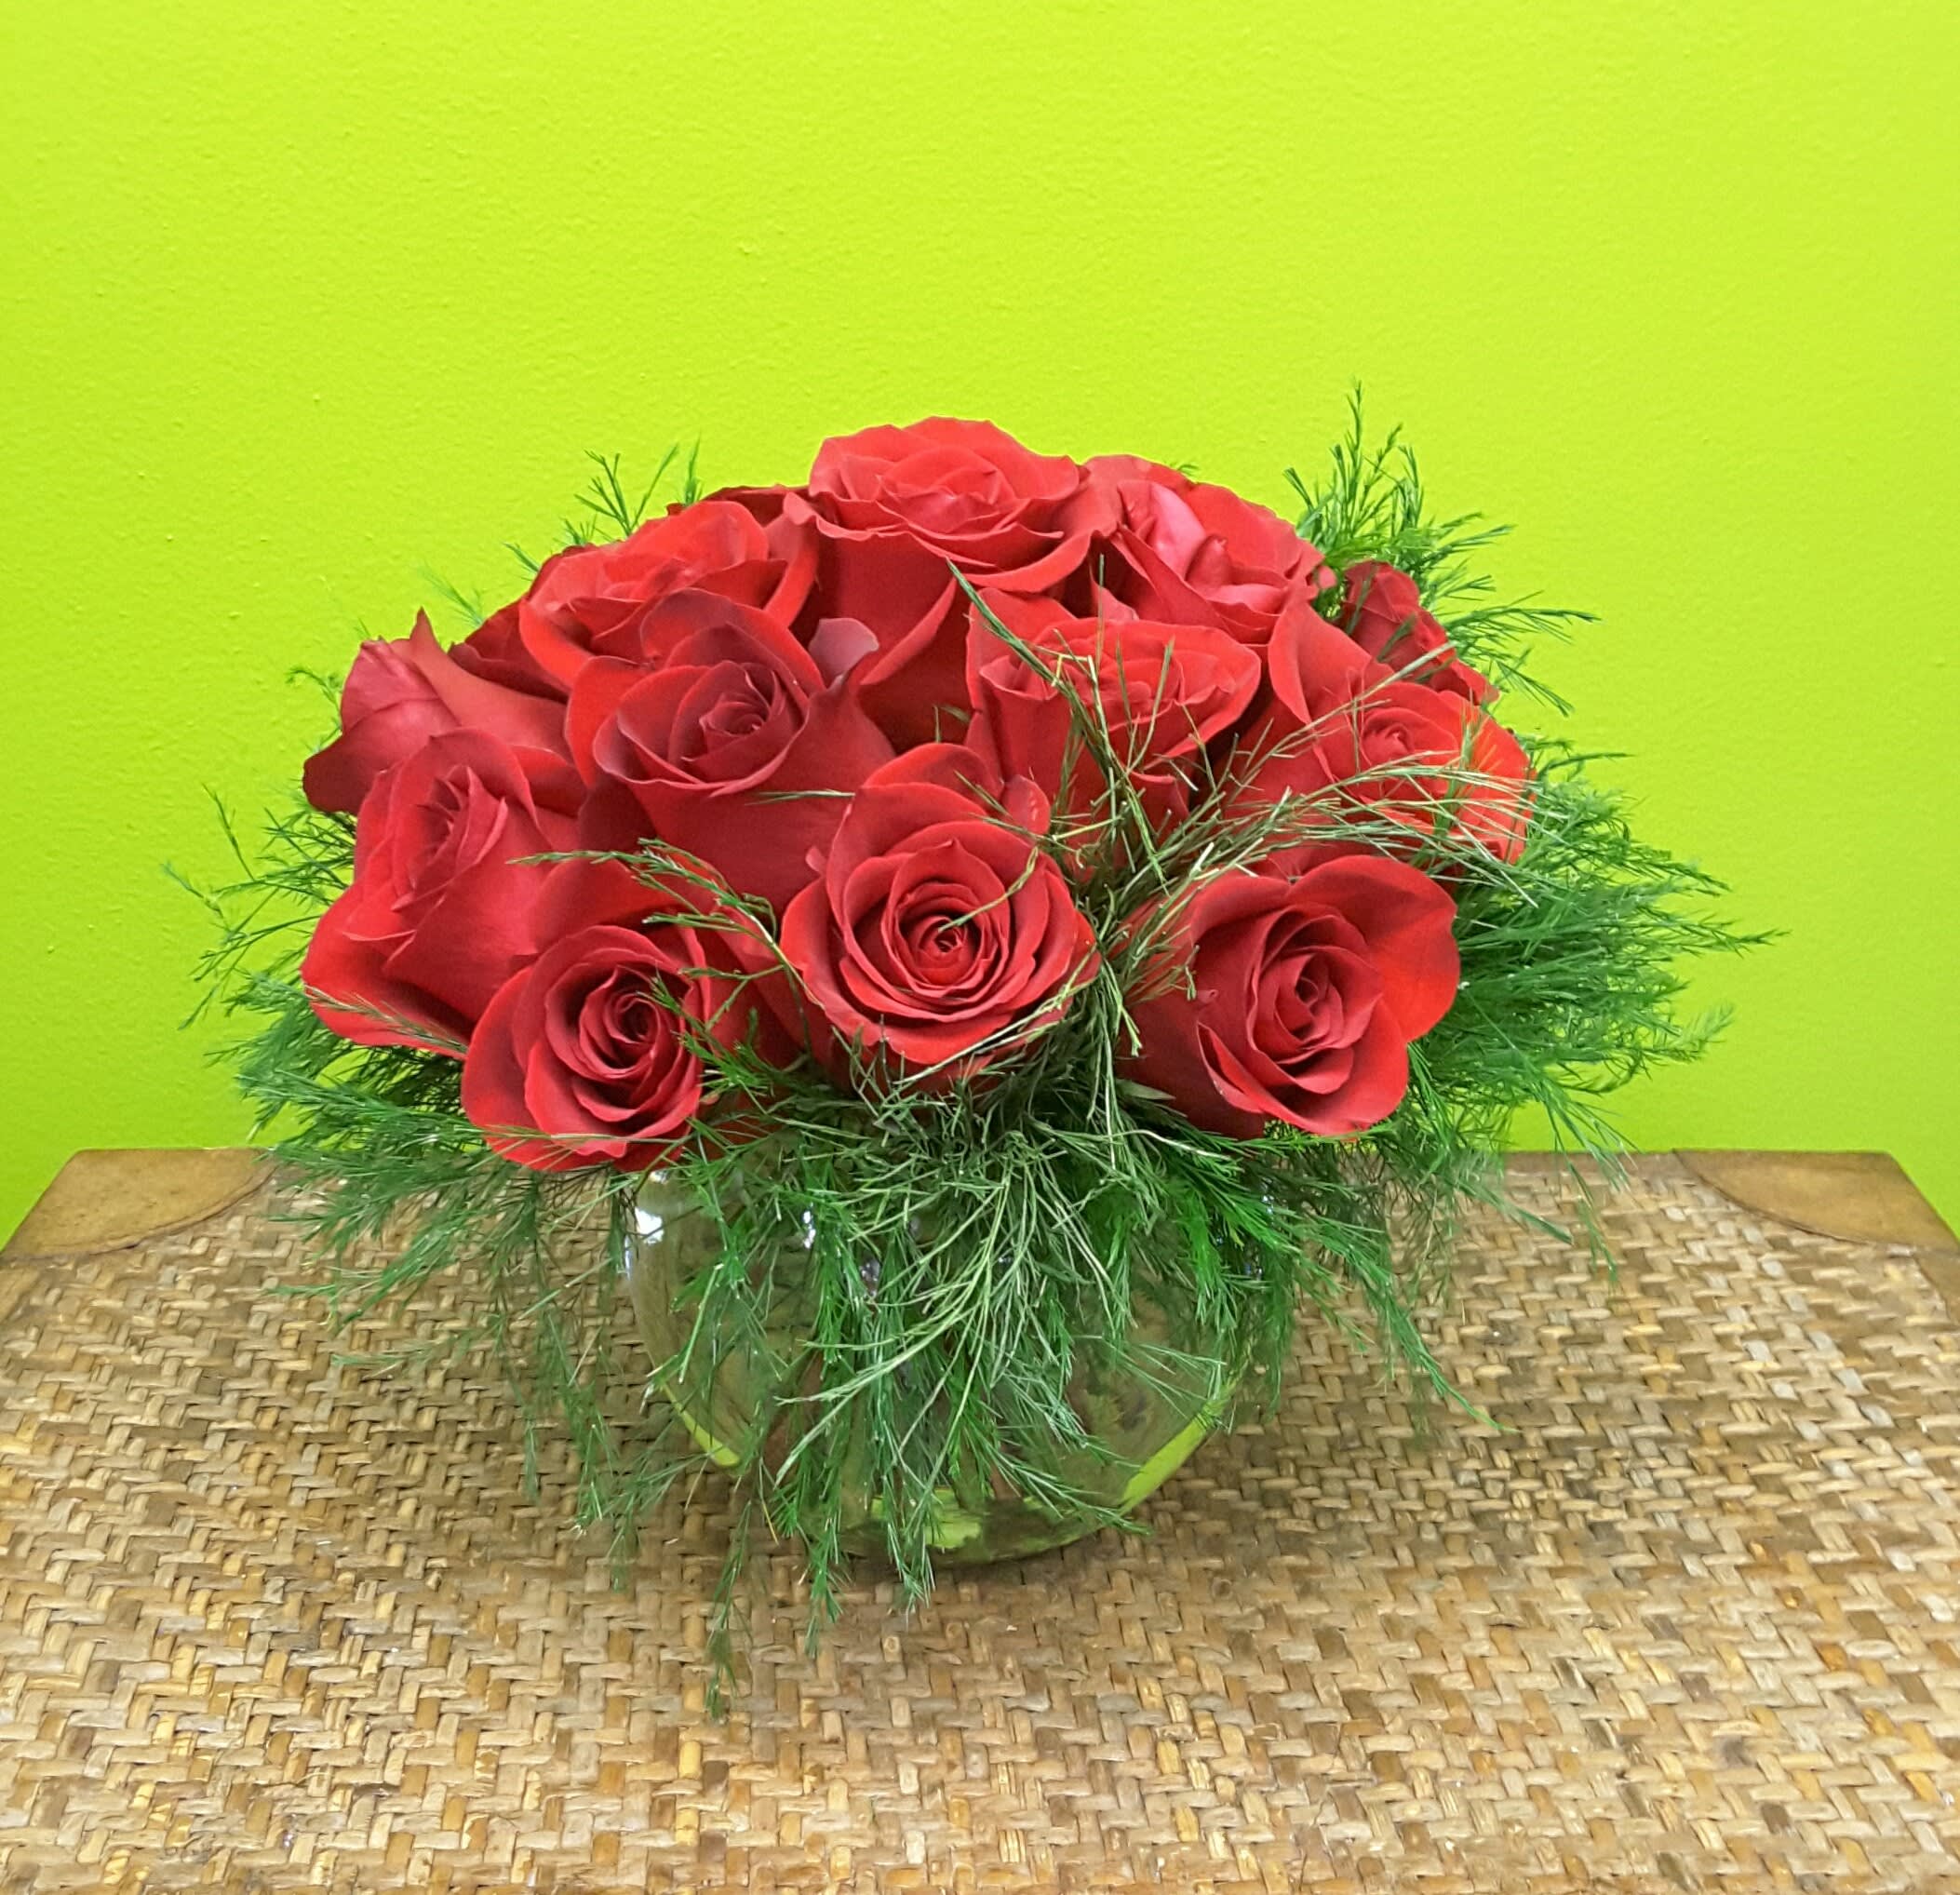 MODERN ROSES  NEW-A38 - Our MODERN ROSE arrangement  is a dozen roses stylishly arranged,low and compact in a round bubble ball container with greens  for that modern look .. Great for a coffee table, side table or any location were a dramatic , modern floral accent is needed.. For larger arrangements , similar in style , please phone us at 1-800-331-5358 for your special needs. 